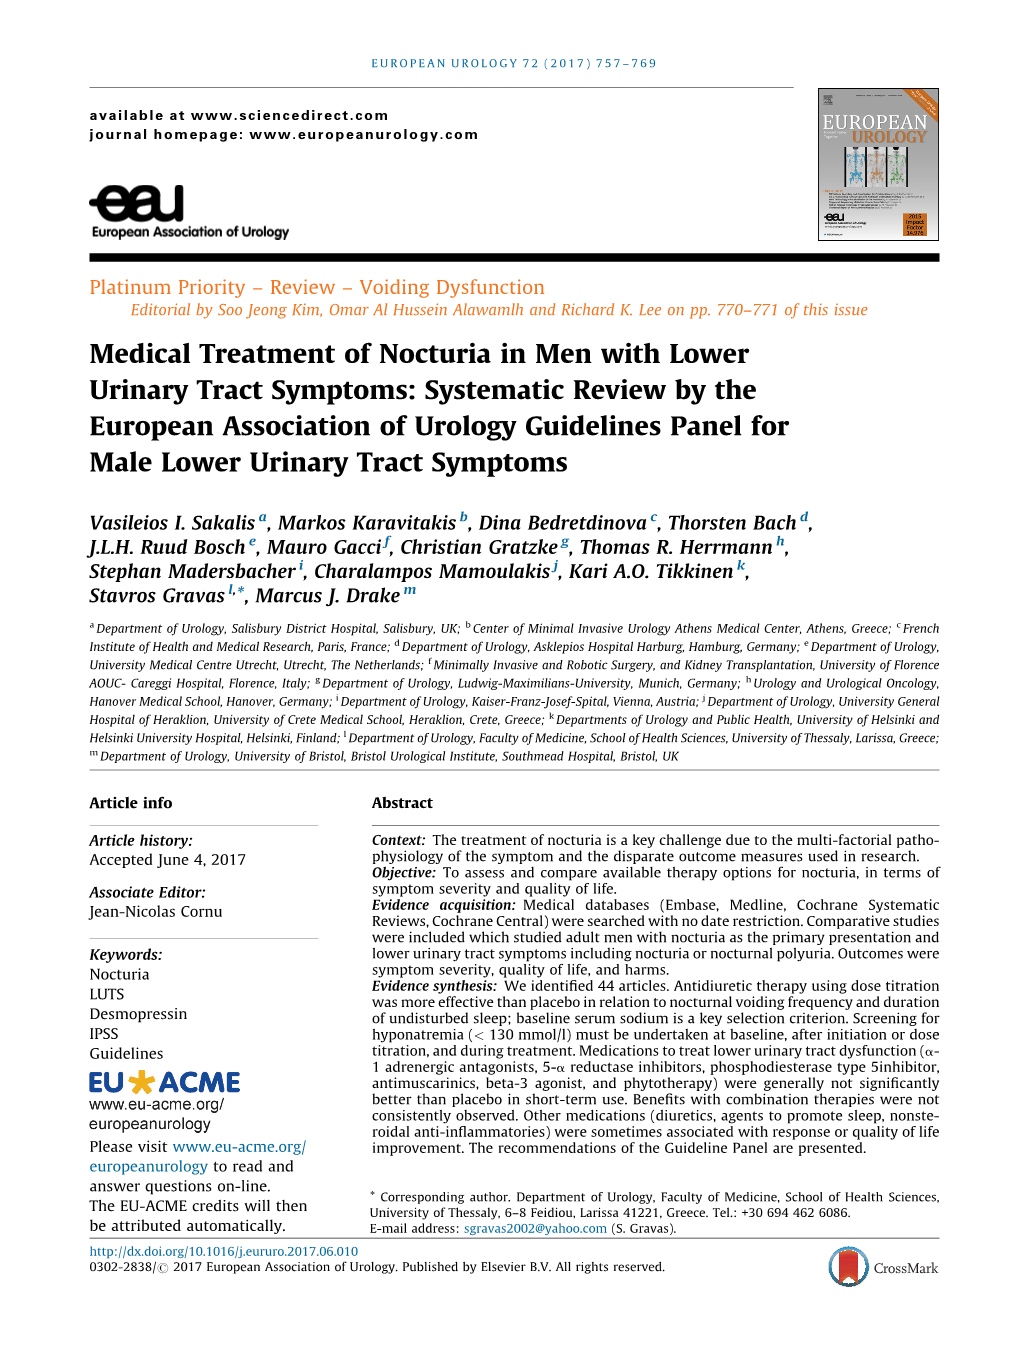 Medical Treatment of Nocturia in Men with Lower Urinary Tract Symptoms